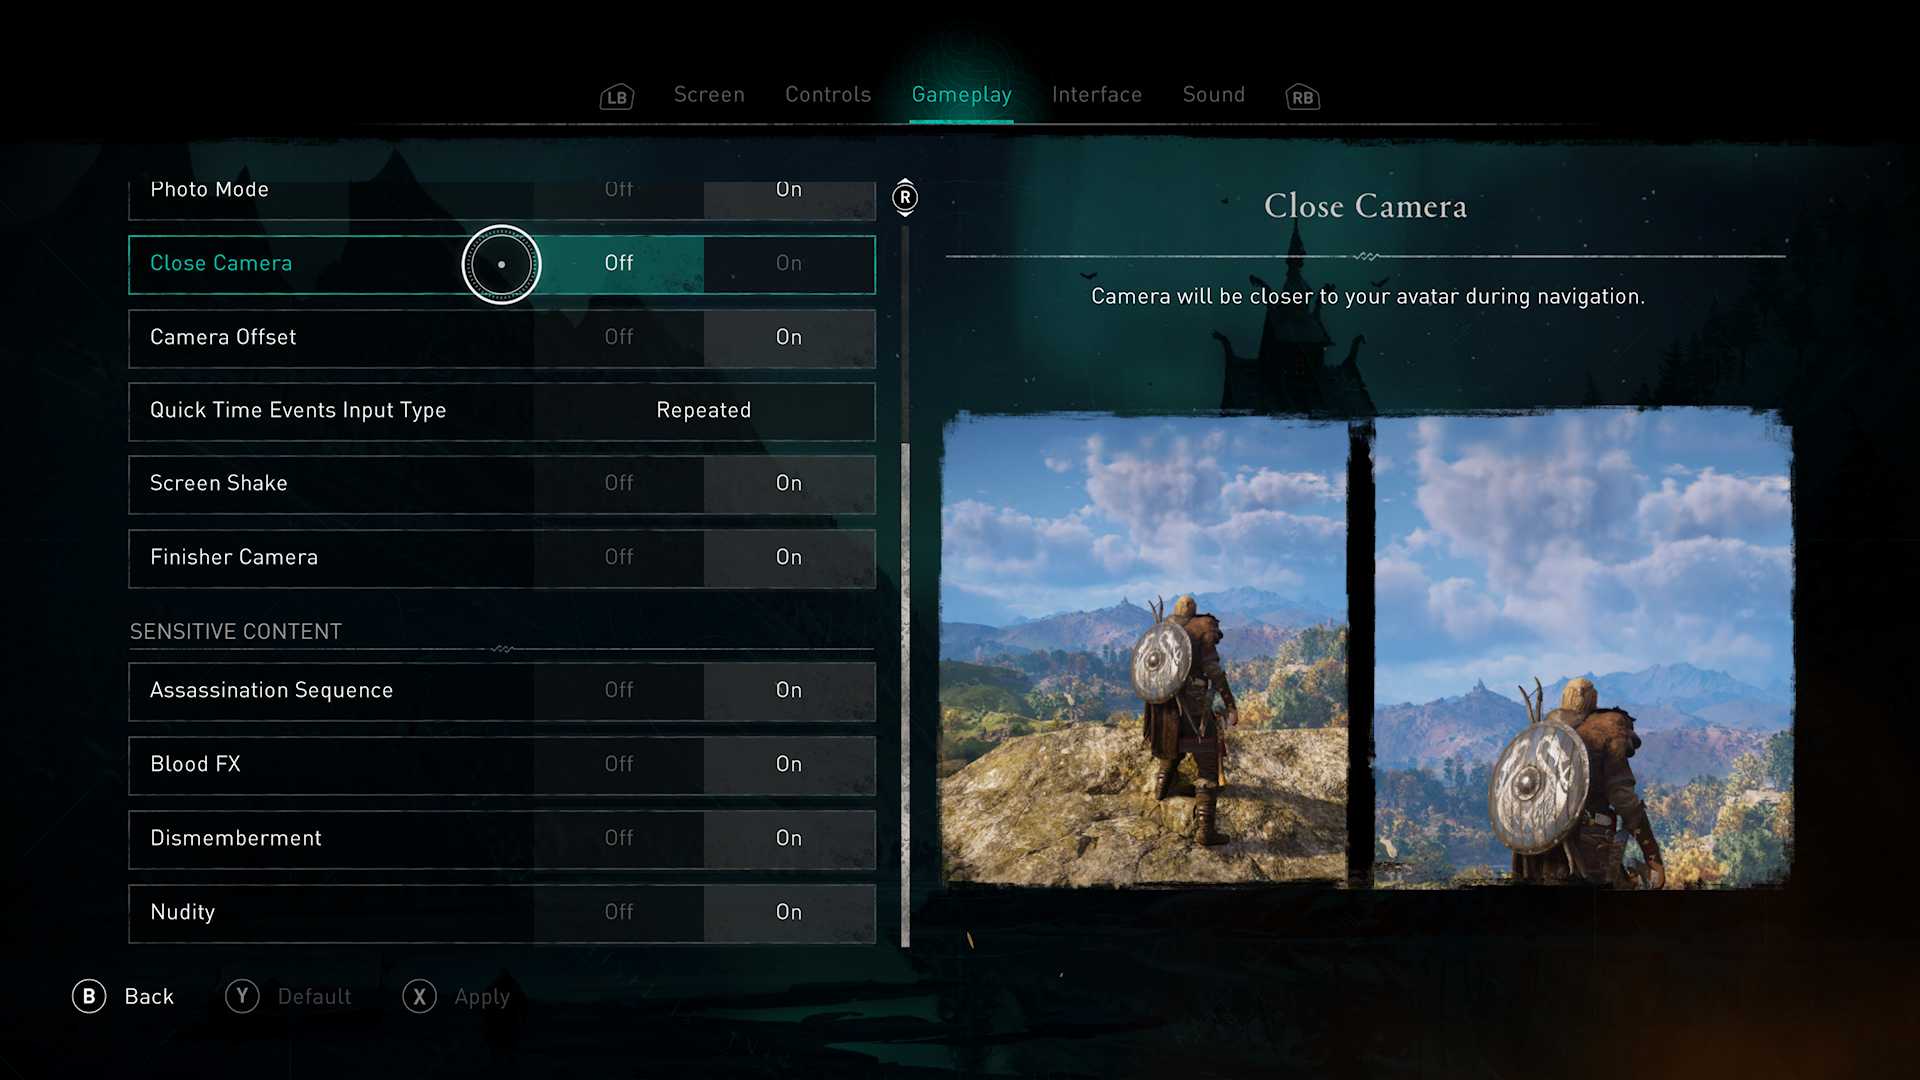 Assassin's Creed Valhalla screenshot of gameplay menu with focus on close camera option currently set to off. A preview of the setting is to the right with two images, one showing the camera back far enough to view the player character's entire back, legs, immediate area surrounding that character. The other image's camera is closer showing the player character's back down to their rear with little visible behind the character.